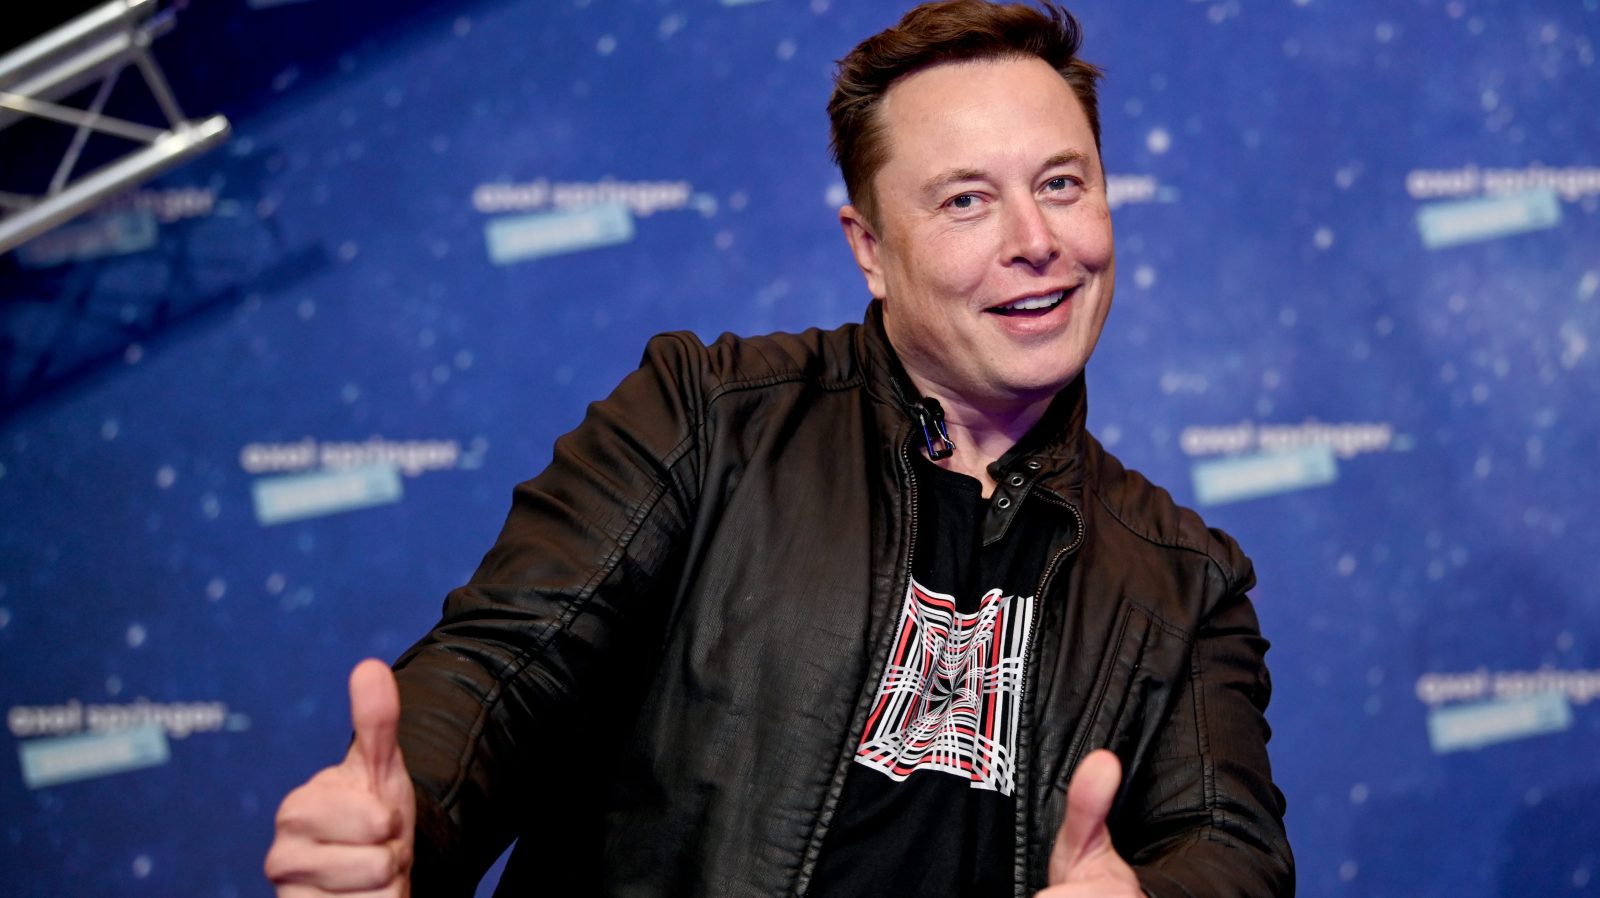 SpaceX owner and Tesla CEO Elon Musk gives two thumbs up for approval